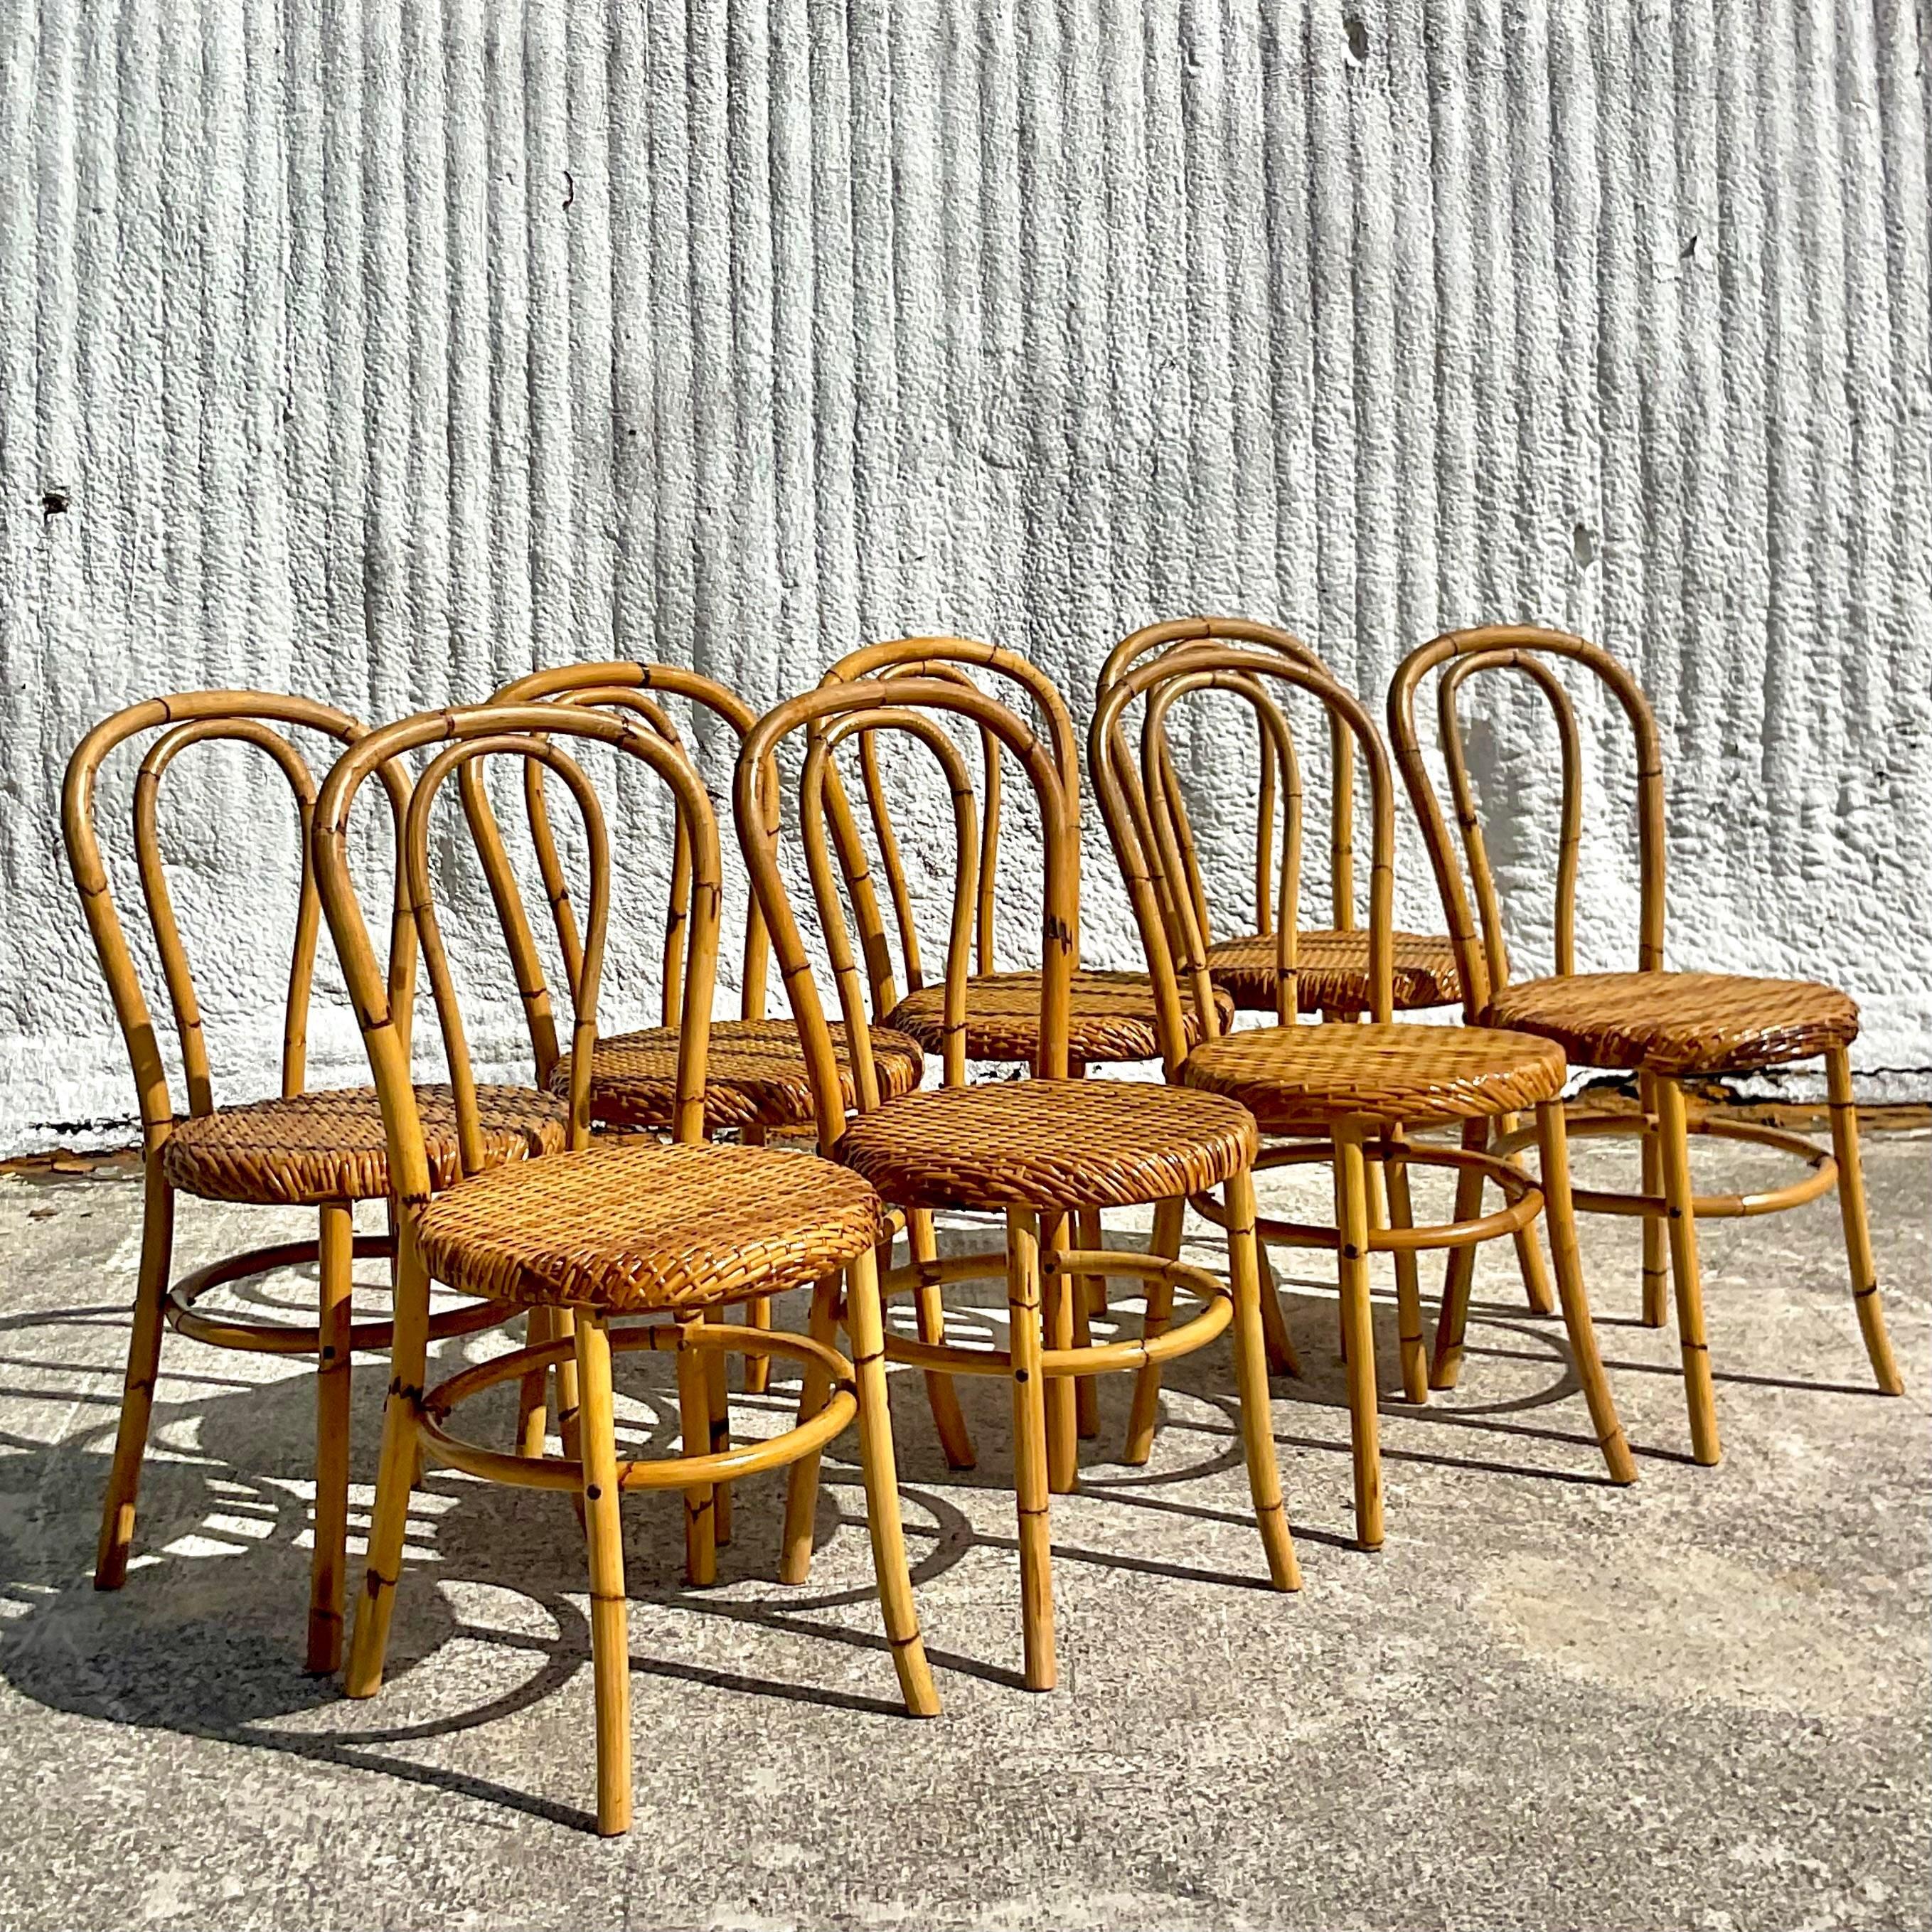 A spectacular vintage set of 8 rare coastal dining chairs. Made by the iconic McGuire group of San Francisco. Beautiful bent bamboo with a woven rattan seat. Tagged on the bottom. Acquired from a Palm Beach estate.